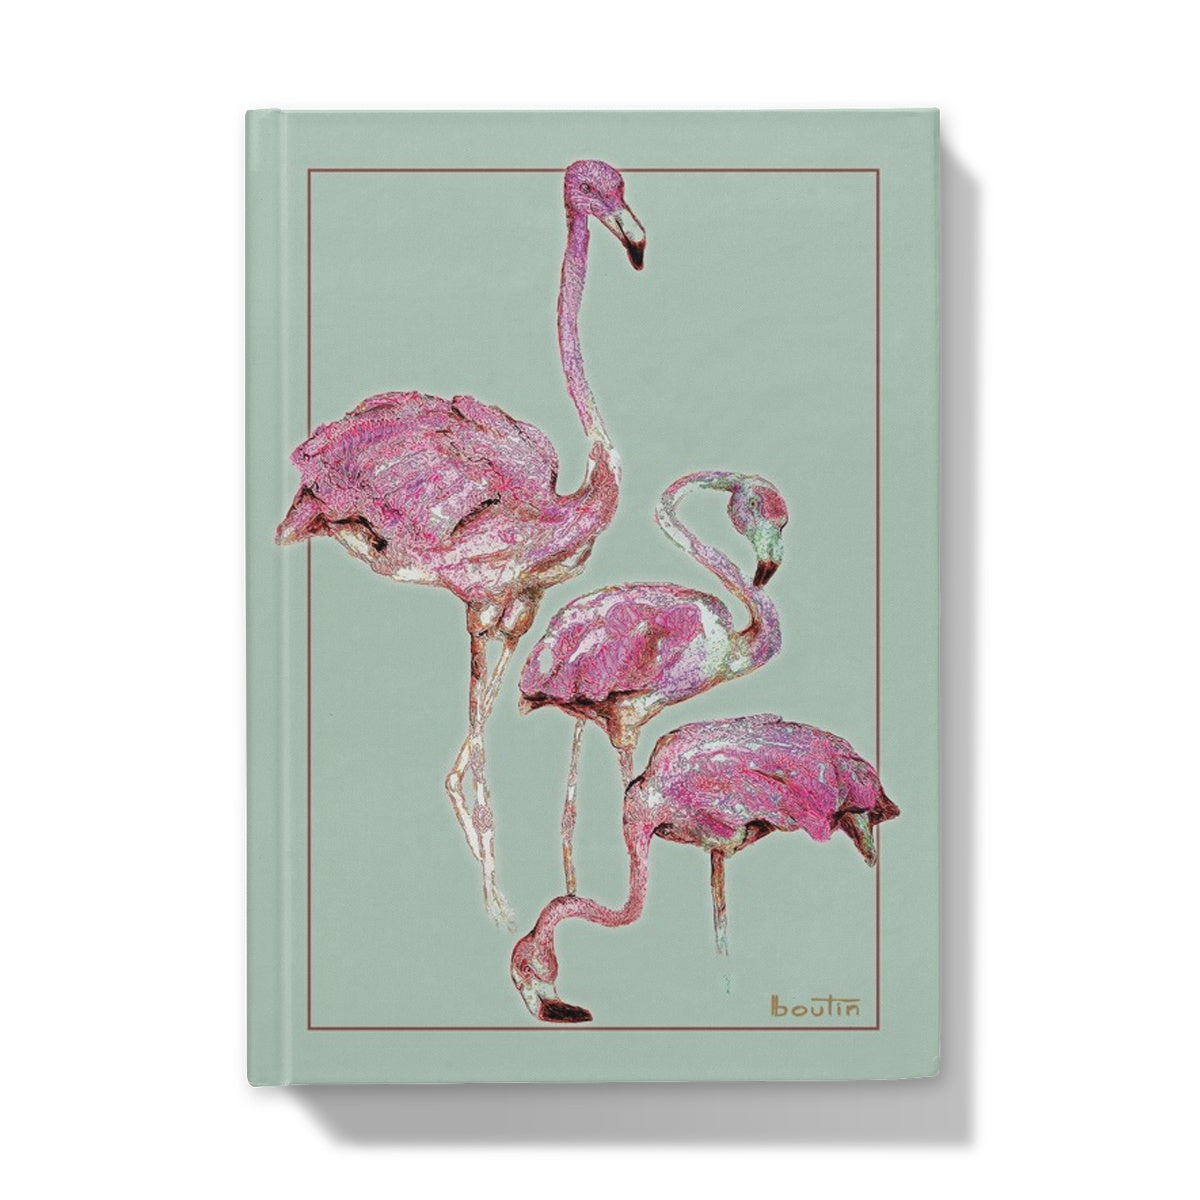 Green Flamingo - Notebook by the artist Boutin